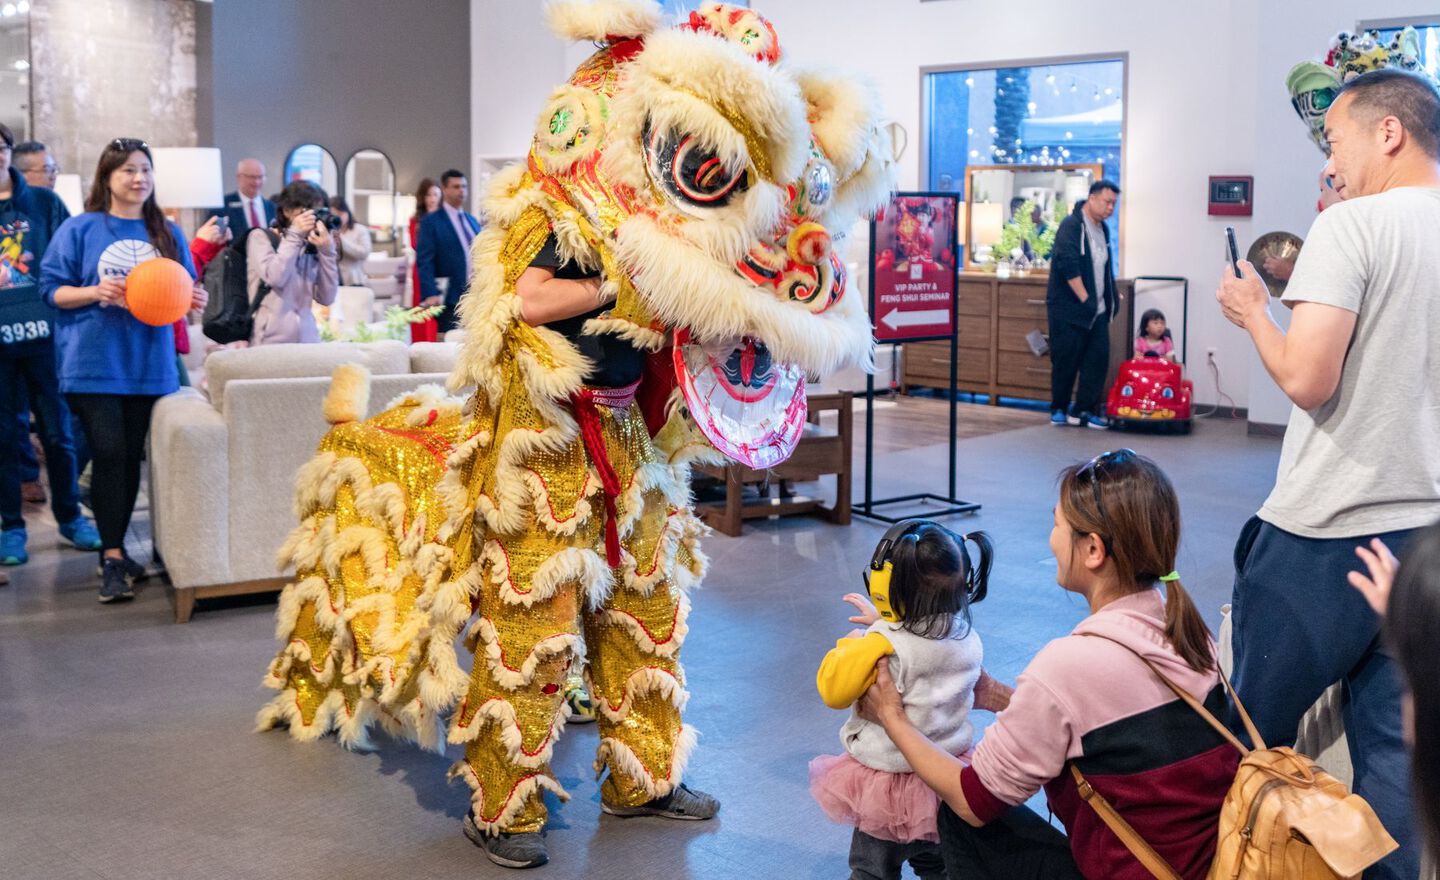 A man in a dancing dragon costume interacting with a small child and her mother